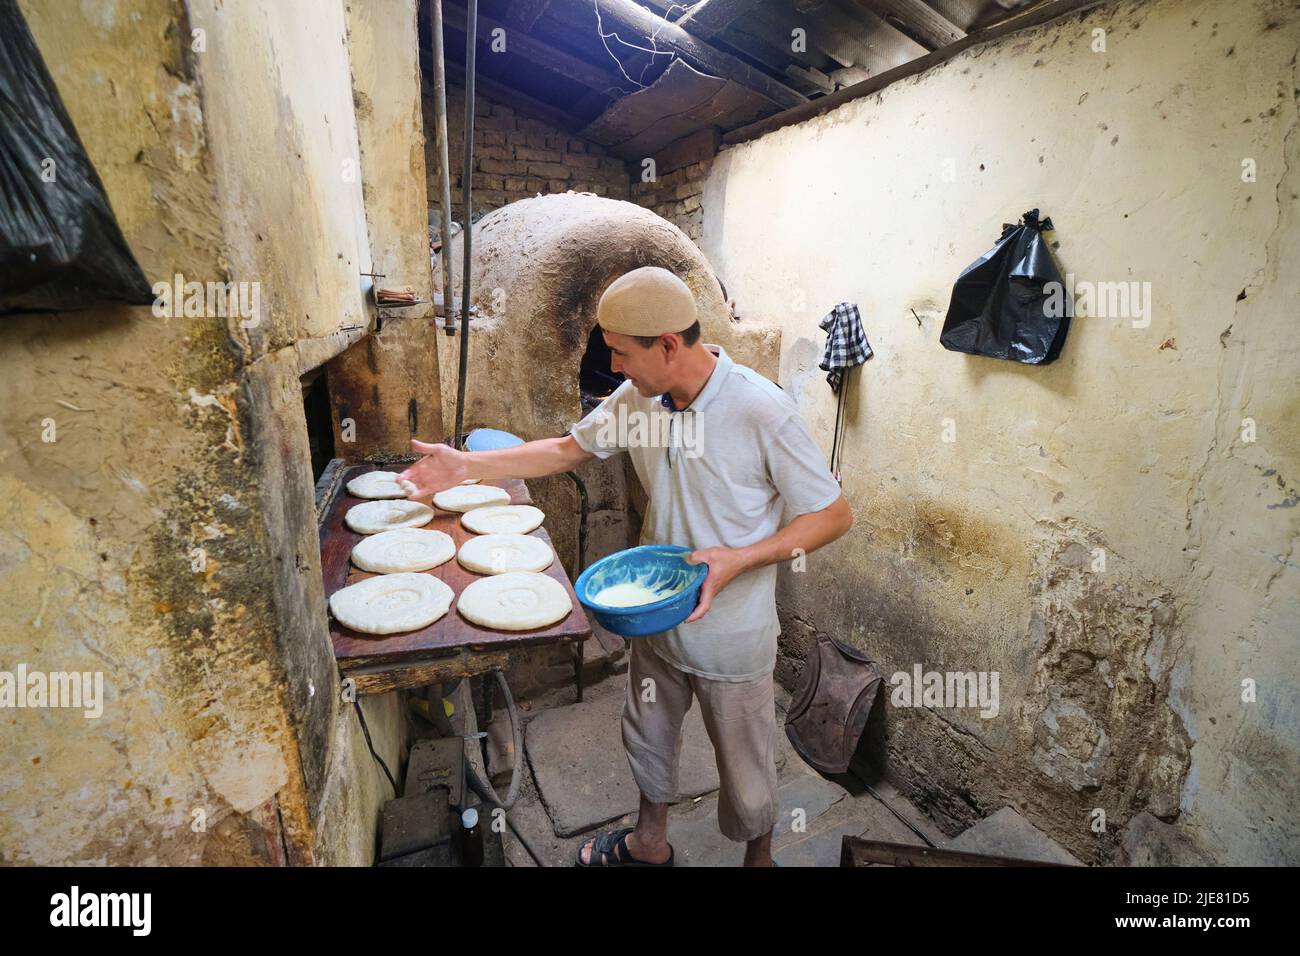 A baker busy prepping non bread dough for tandir oven cooking. This operation is a typical small, local, hidden behind a house, set up. In Namangan, F Stock Photo